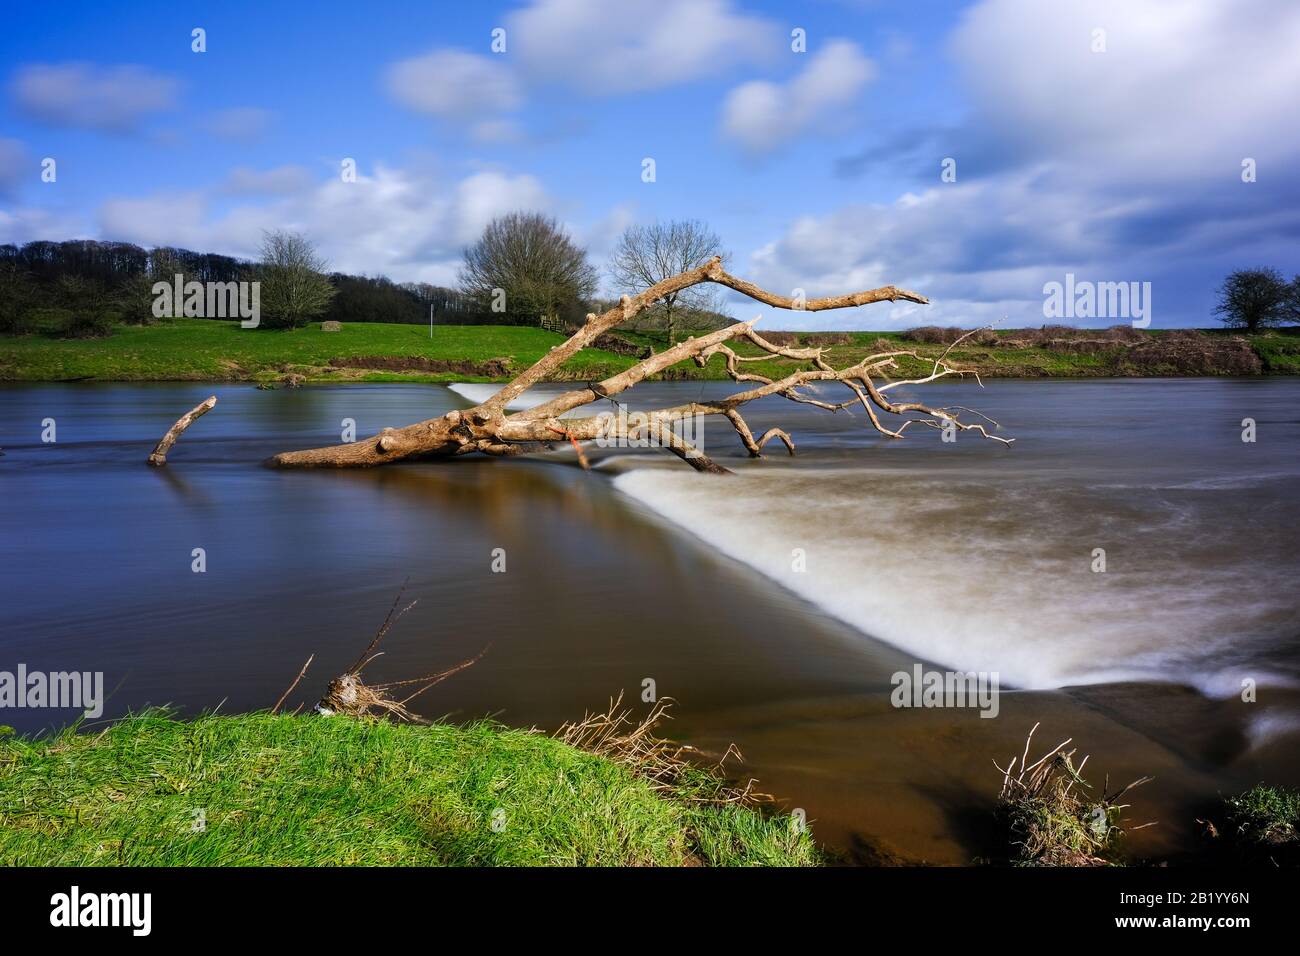 A fallen tree adrift in the River Ribble following UK winter storms Stock Photo